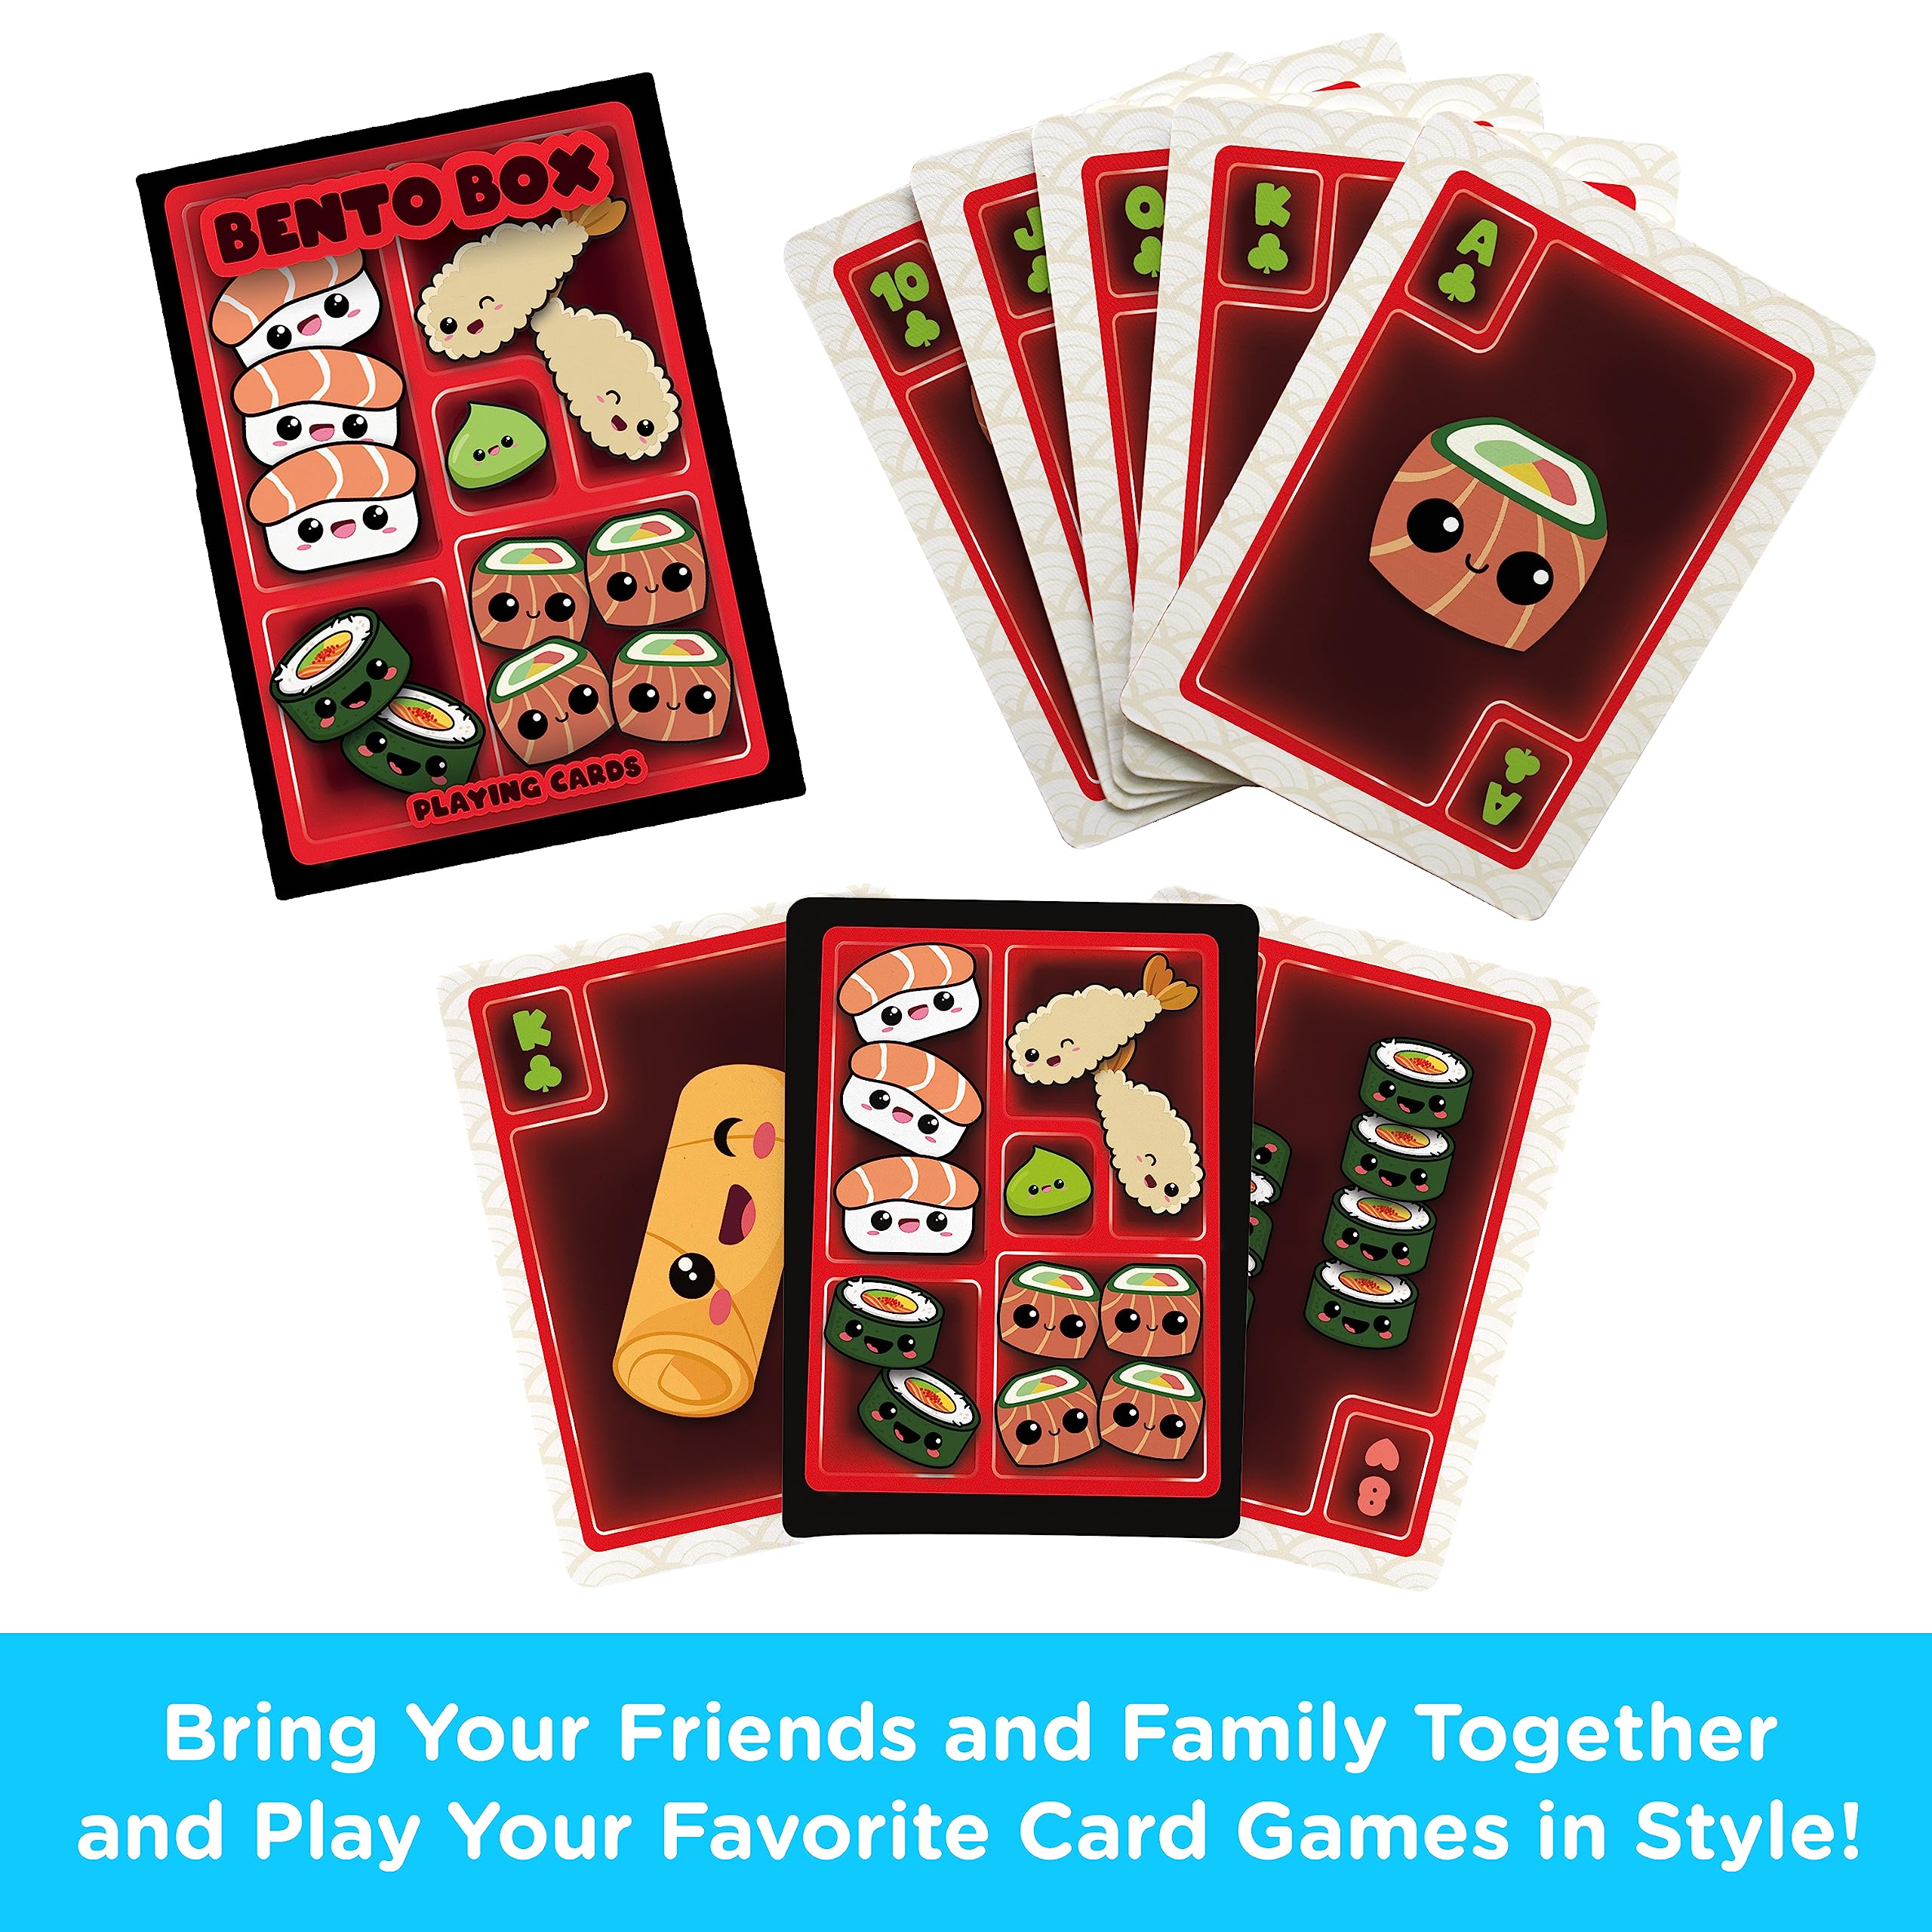 Aquarius Bento Box Playing Cards -Bento Box Themed Deck of Cards for Your Favorite Card Games - Officially Licensed Merchandise & Collectibles, 2.5 x 3.5